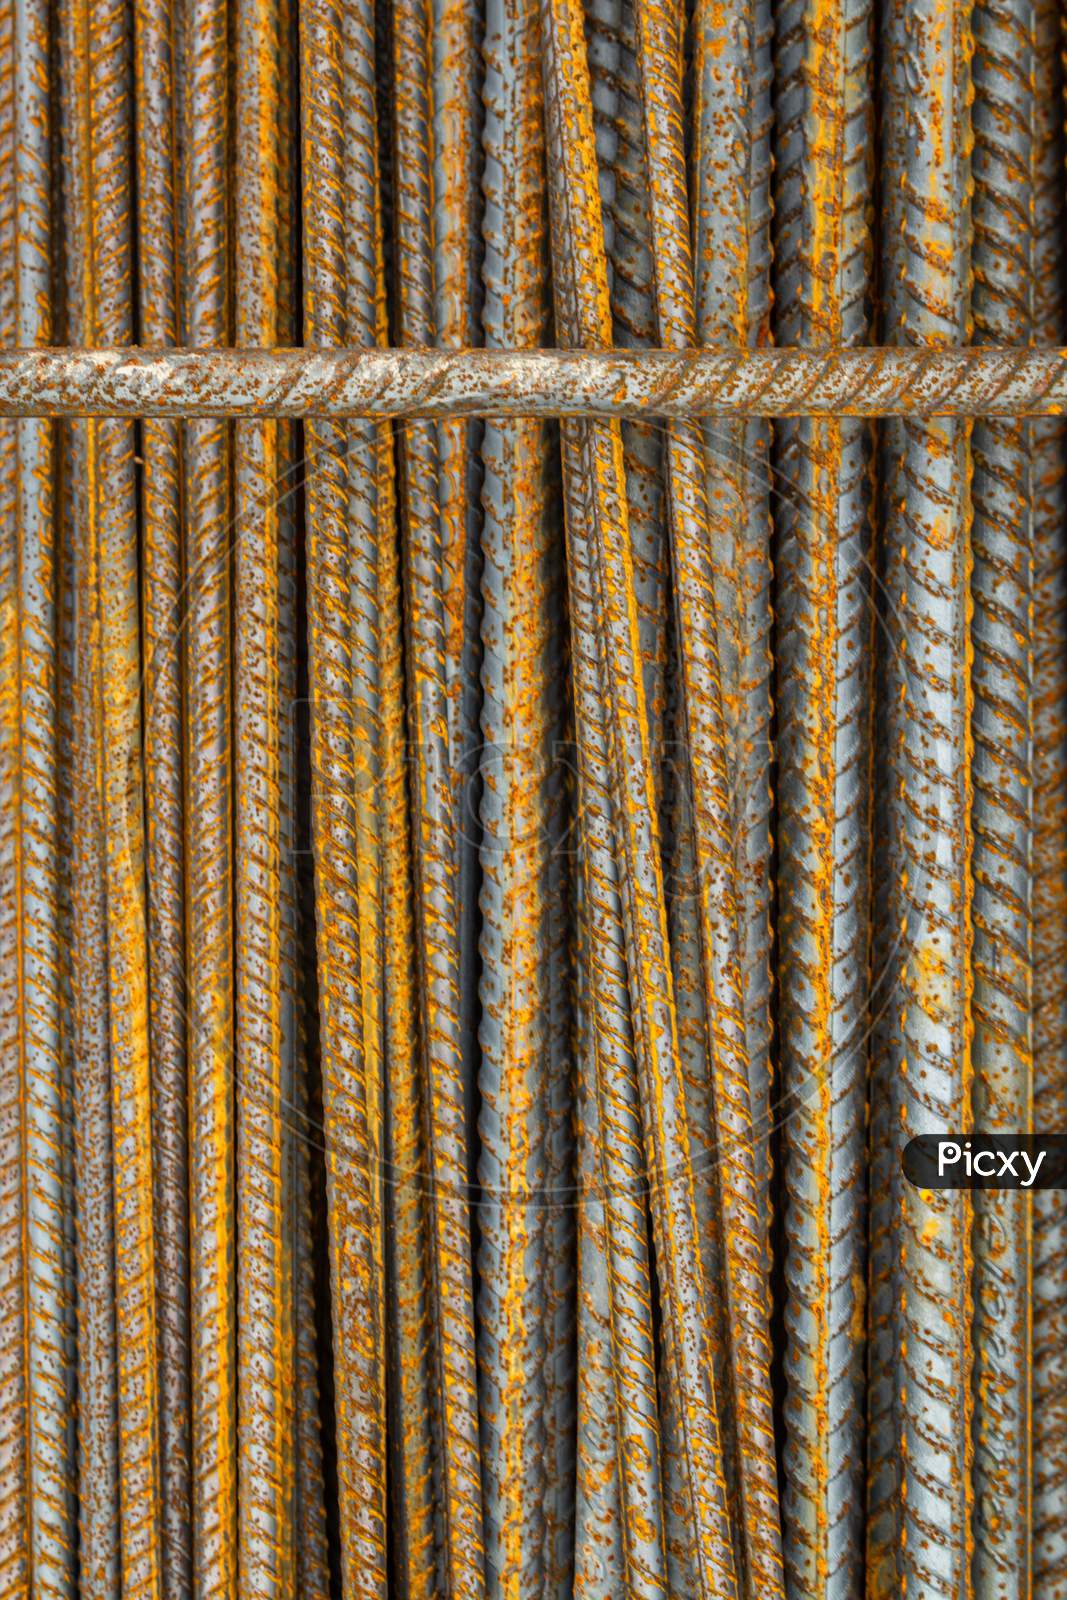 Rusty Steel Rods. Material For The Construction Of Buildings And Houses. Strong Metallic Material Forming A Repeating Pattern